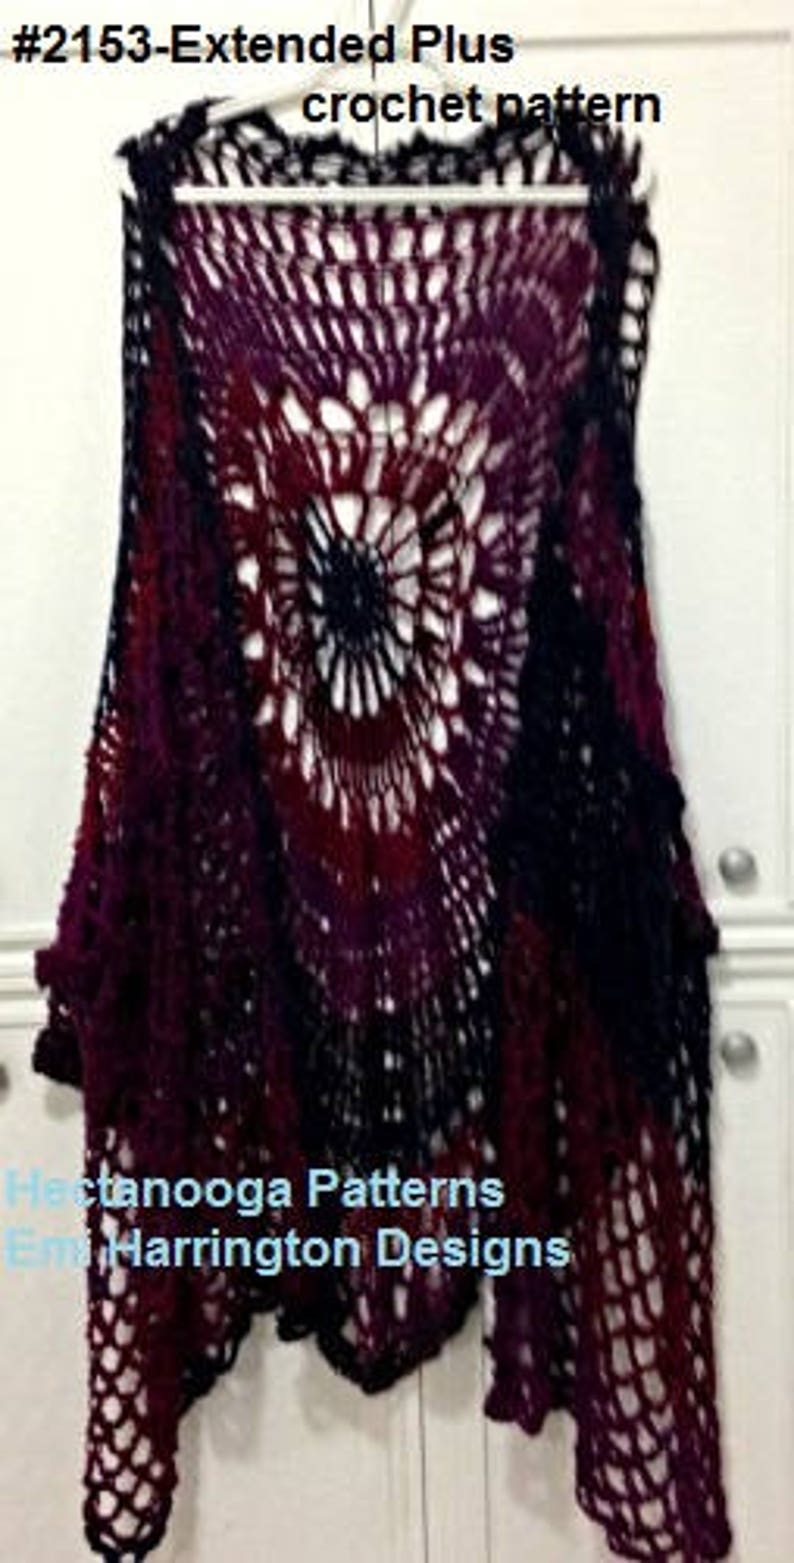 CROCHET PATTERN Extended Plus Clothing, Women's vest, in 3X, 4X, 5X, and 6X sizes, Mandala Bohemian Vest, 2153XP, Hectanooga Patterns image 5